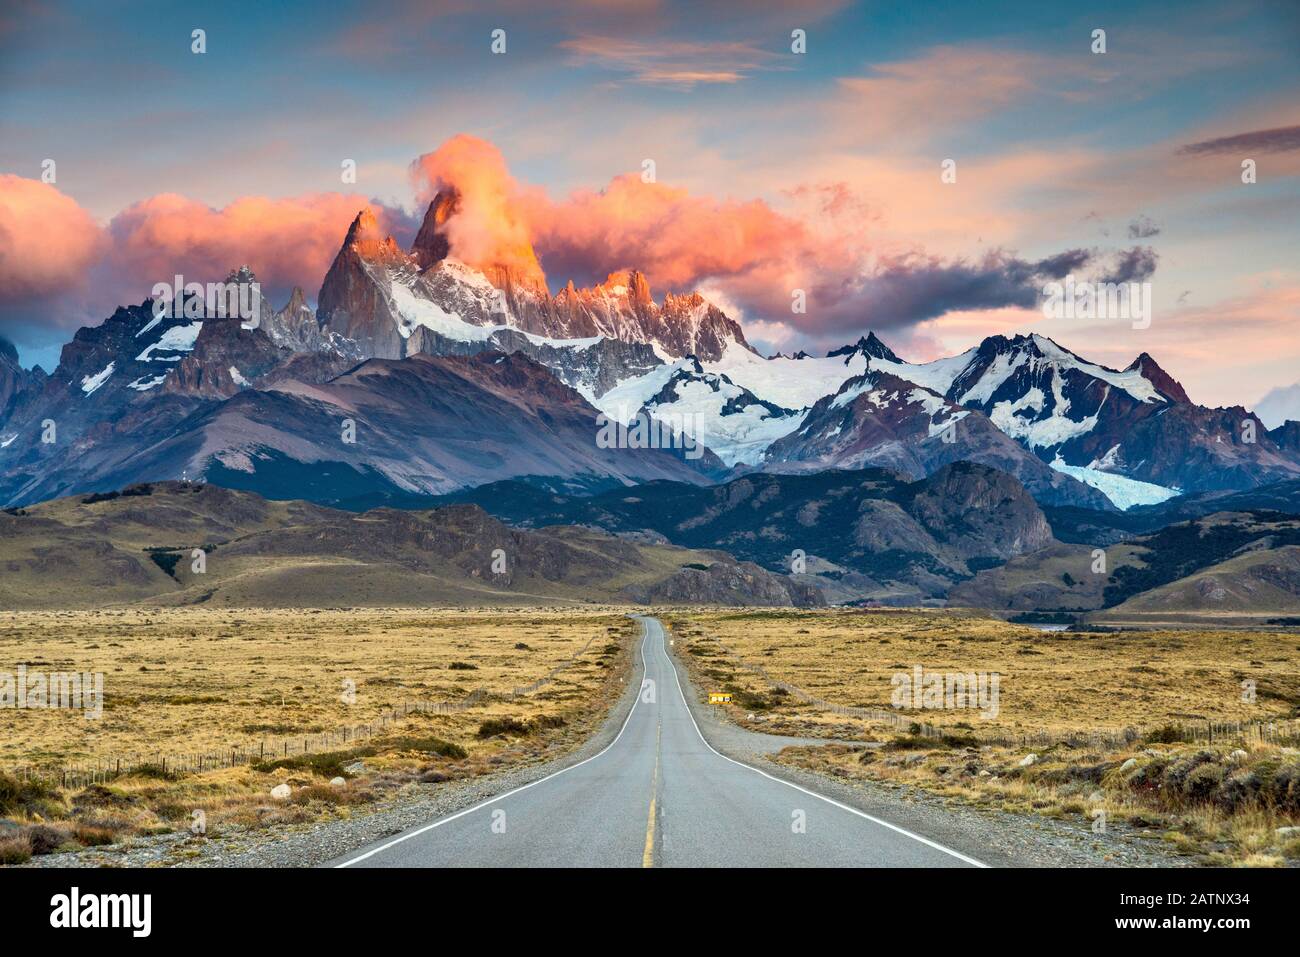 Cerro Fitz Roy range at sunrise, Andes Mountains, Los Glaciares National Park, view from road to El Chalten, Patagonia, Argentina Stock Photo